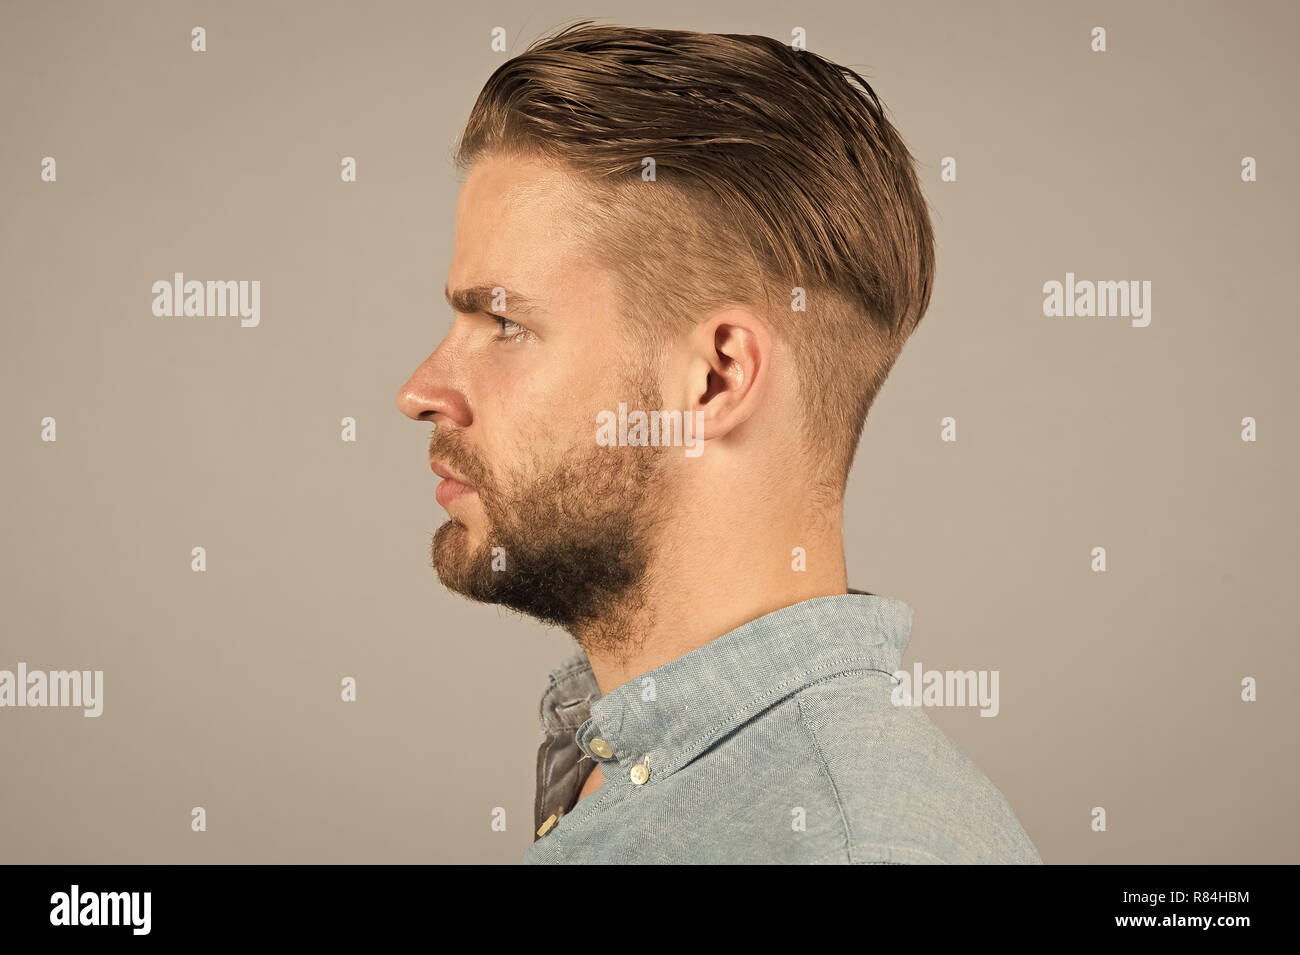 Man with bearded face in profile. Macho with beard and mustache. Guy with  stylish hair and unshaven skin. Beard grooming and hair care in barbershop.  Skincare and mens beauty concept Stock Photo -